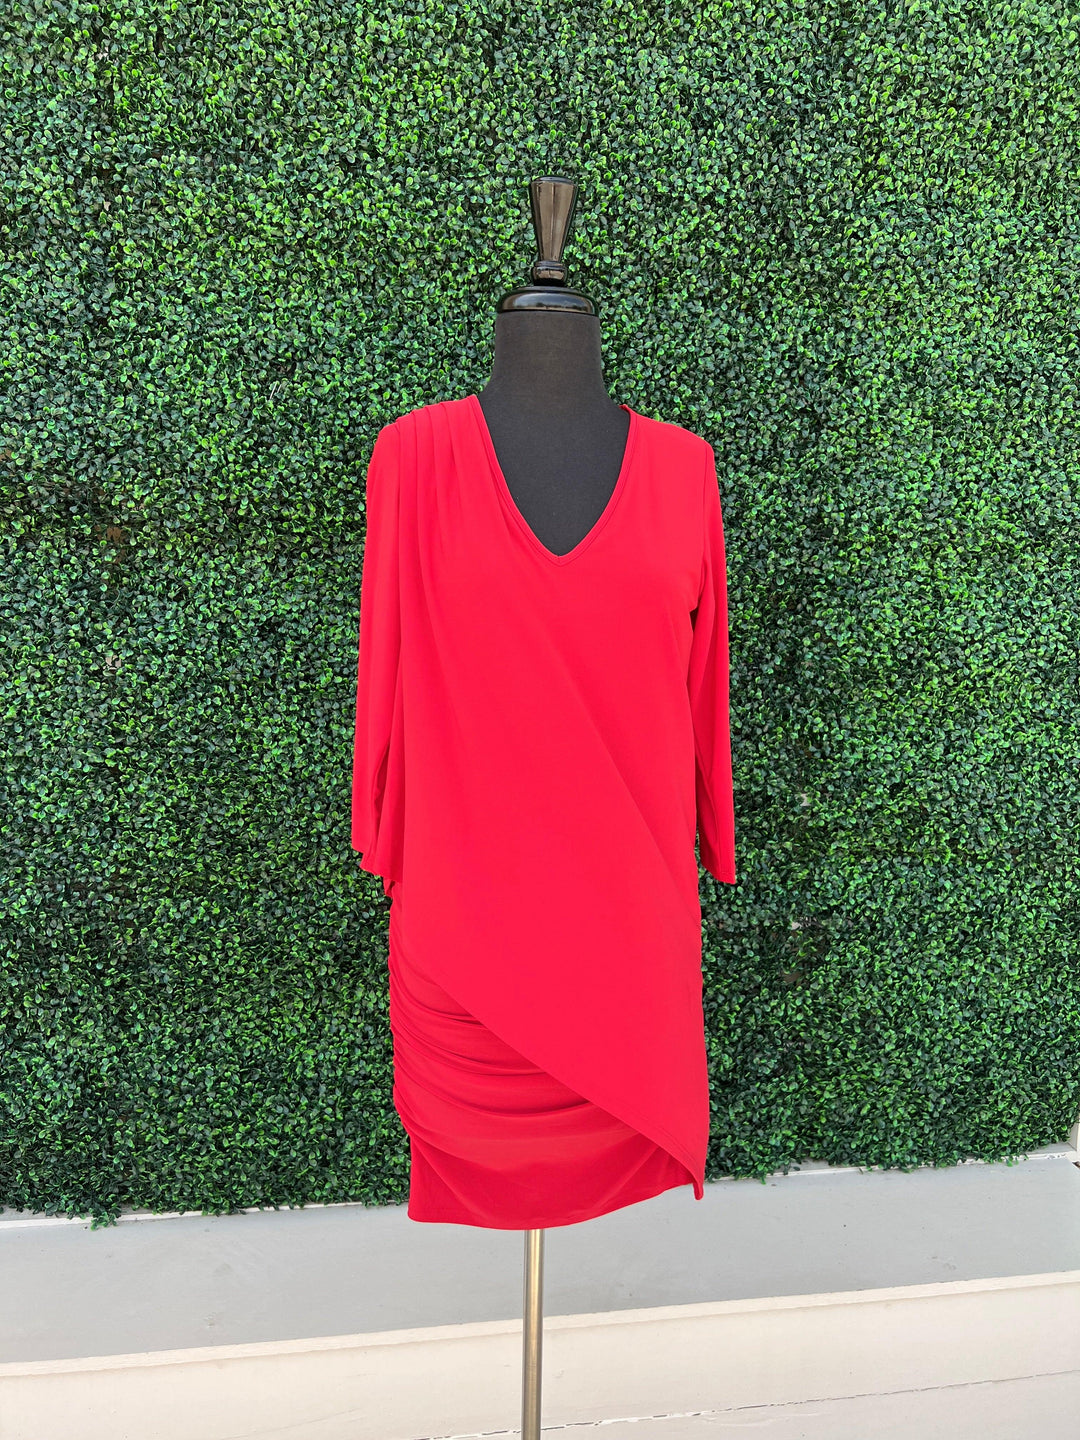 flattering and stylish dresses for women over 50 tres chic houston